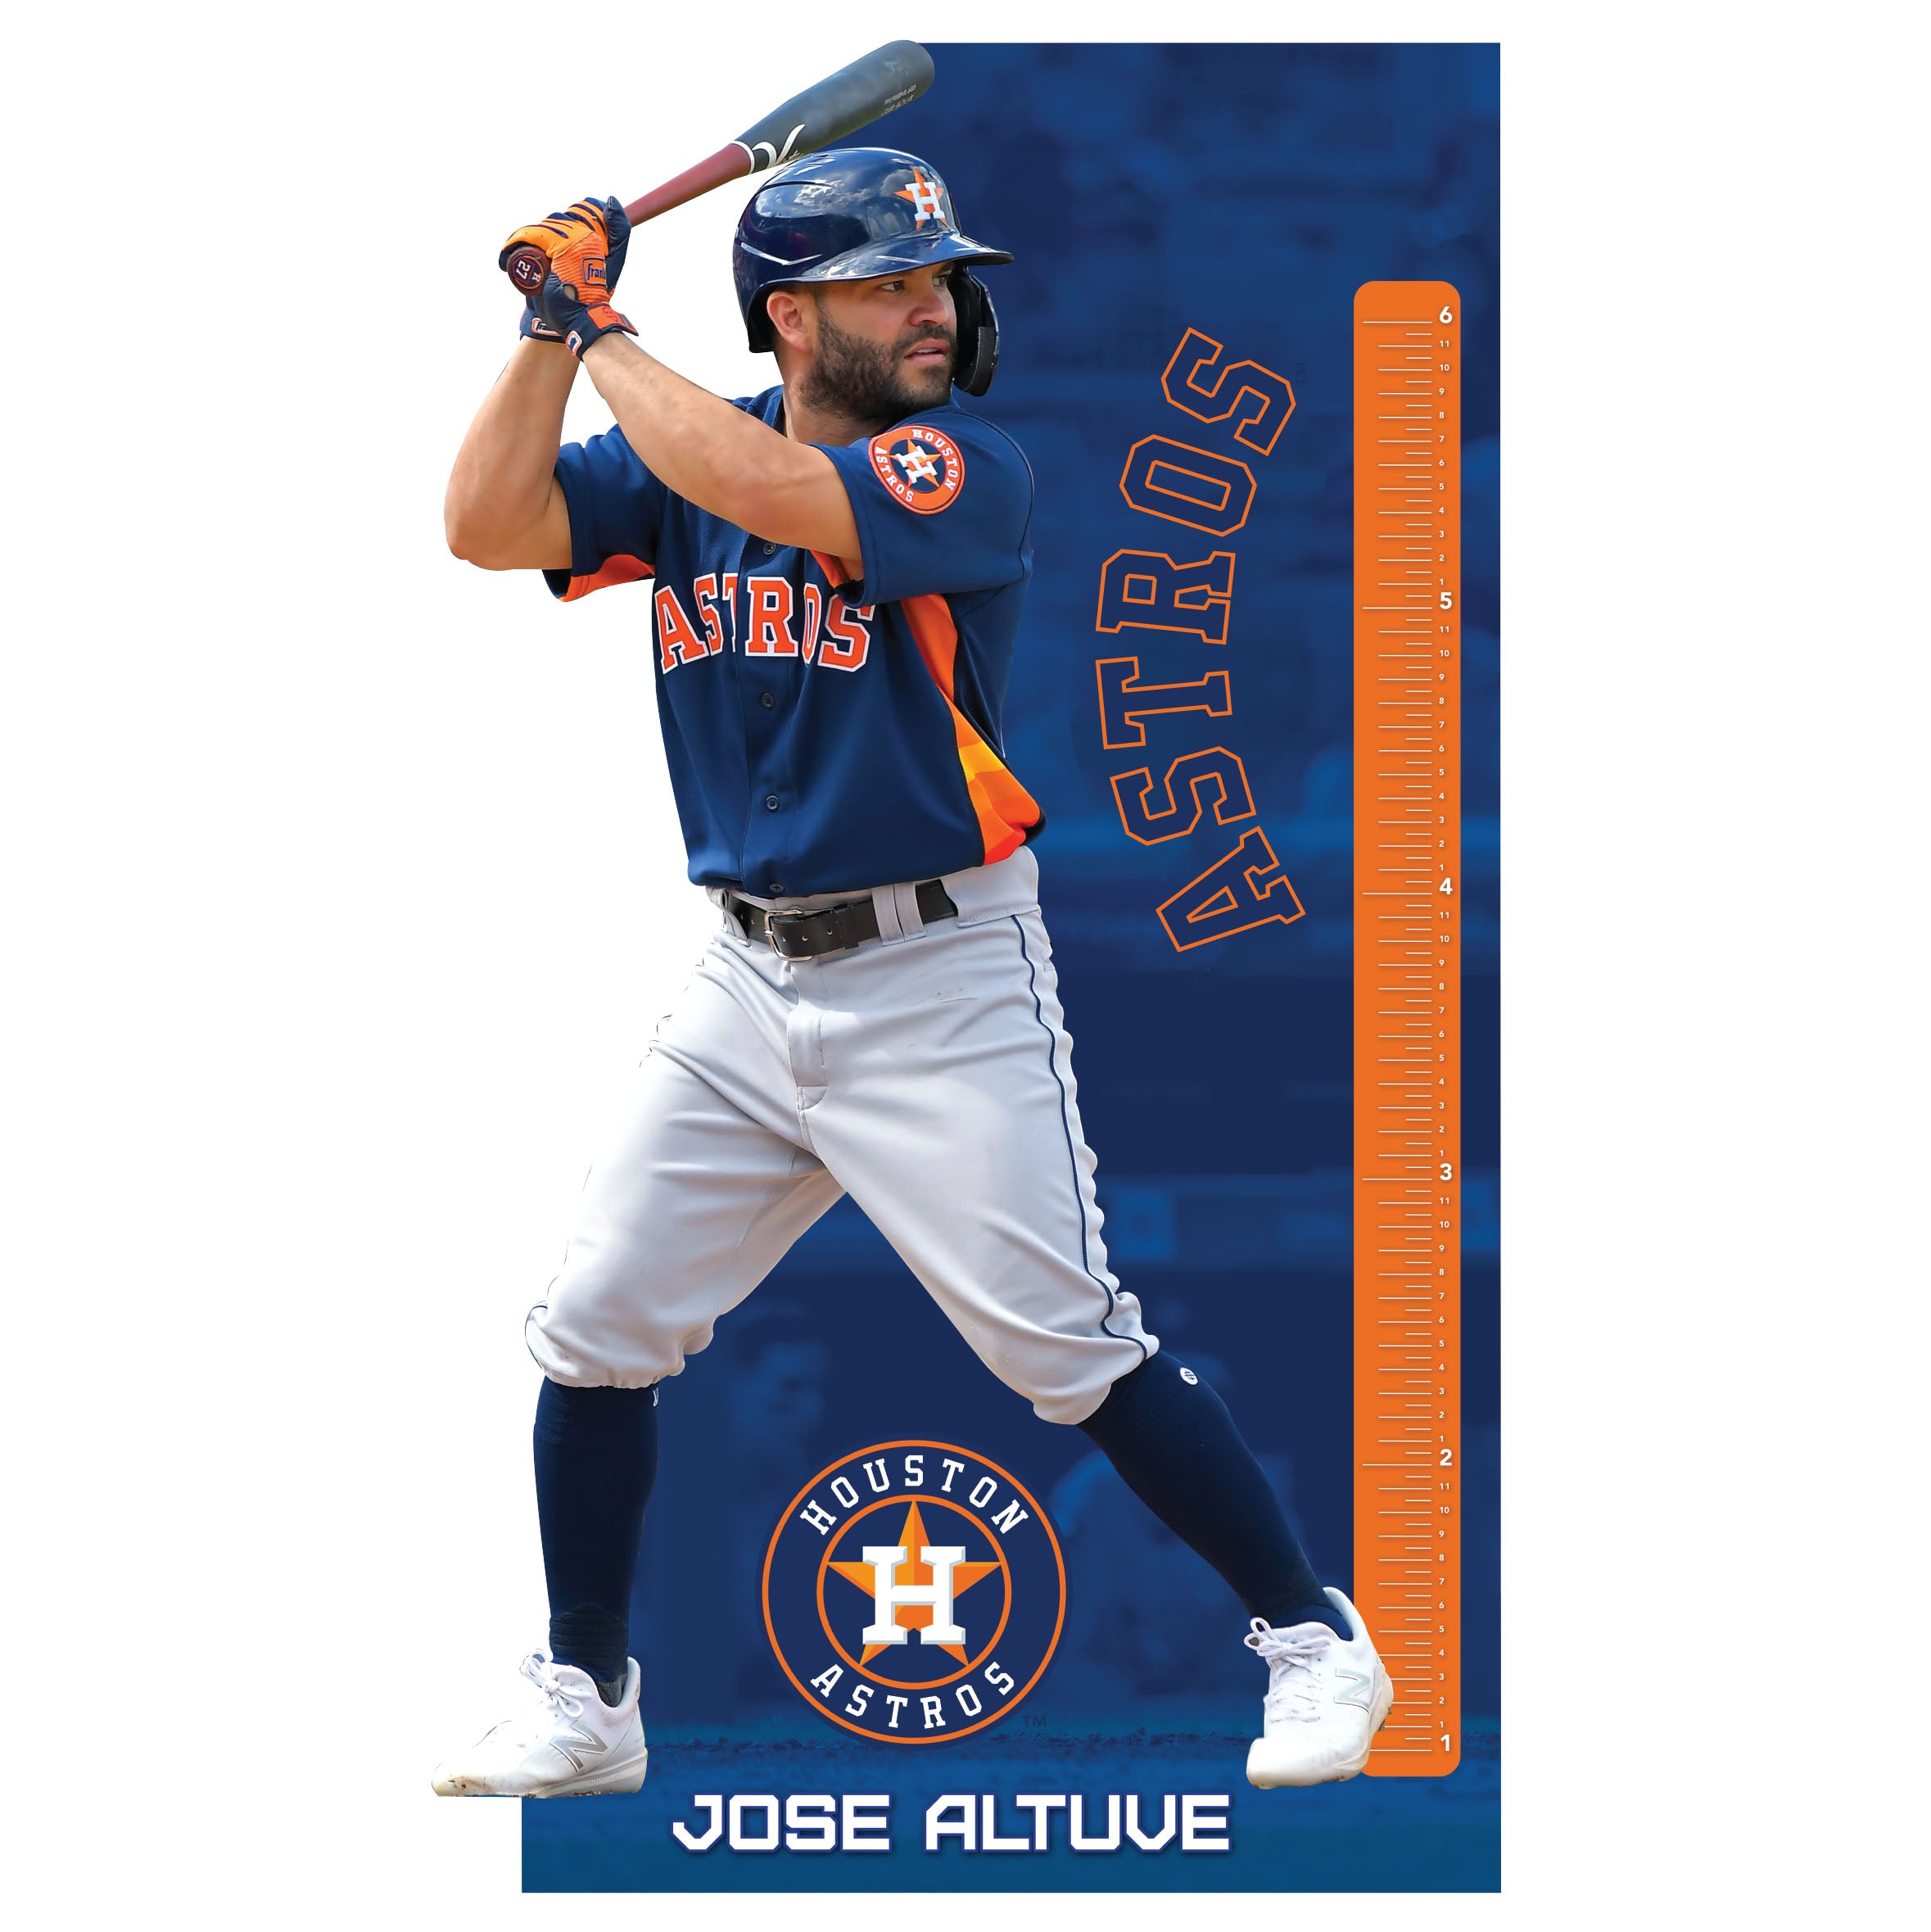 Jose Altuve Houston Astros Majestic Toddler Official Player Cool